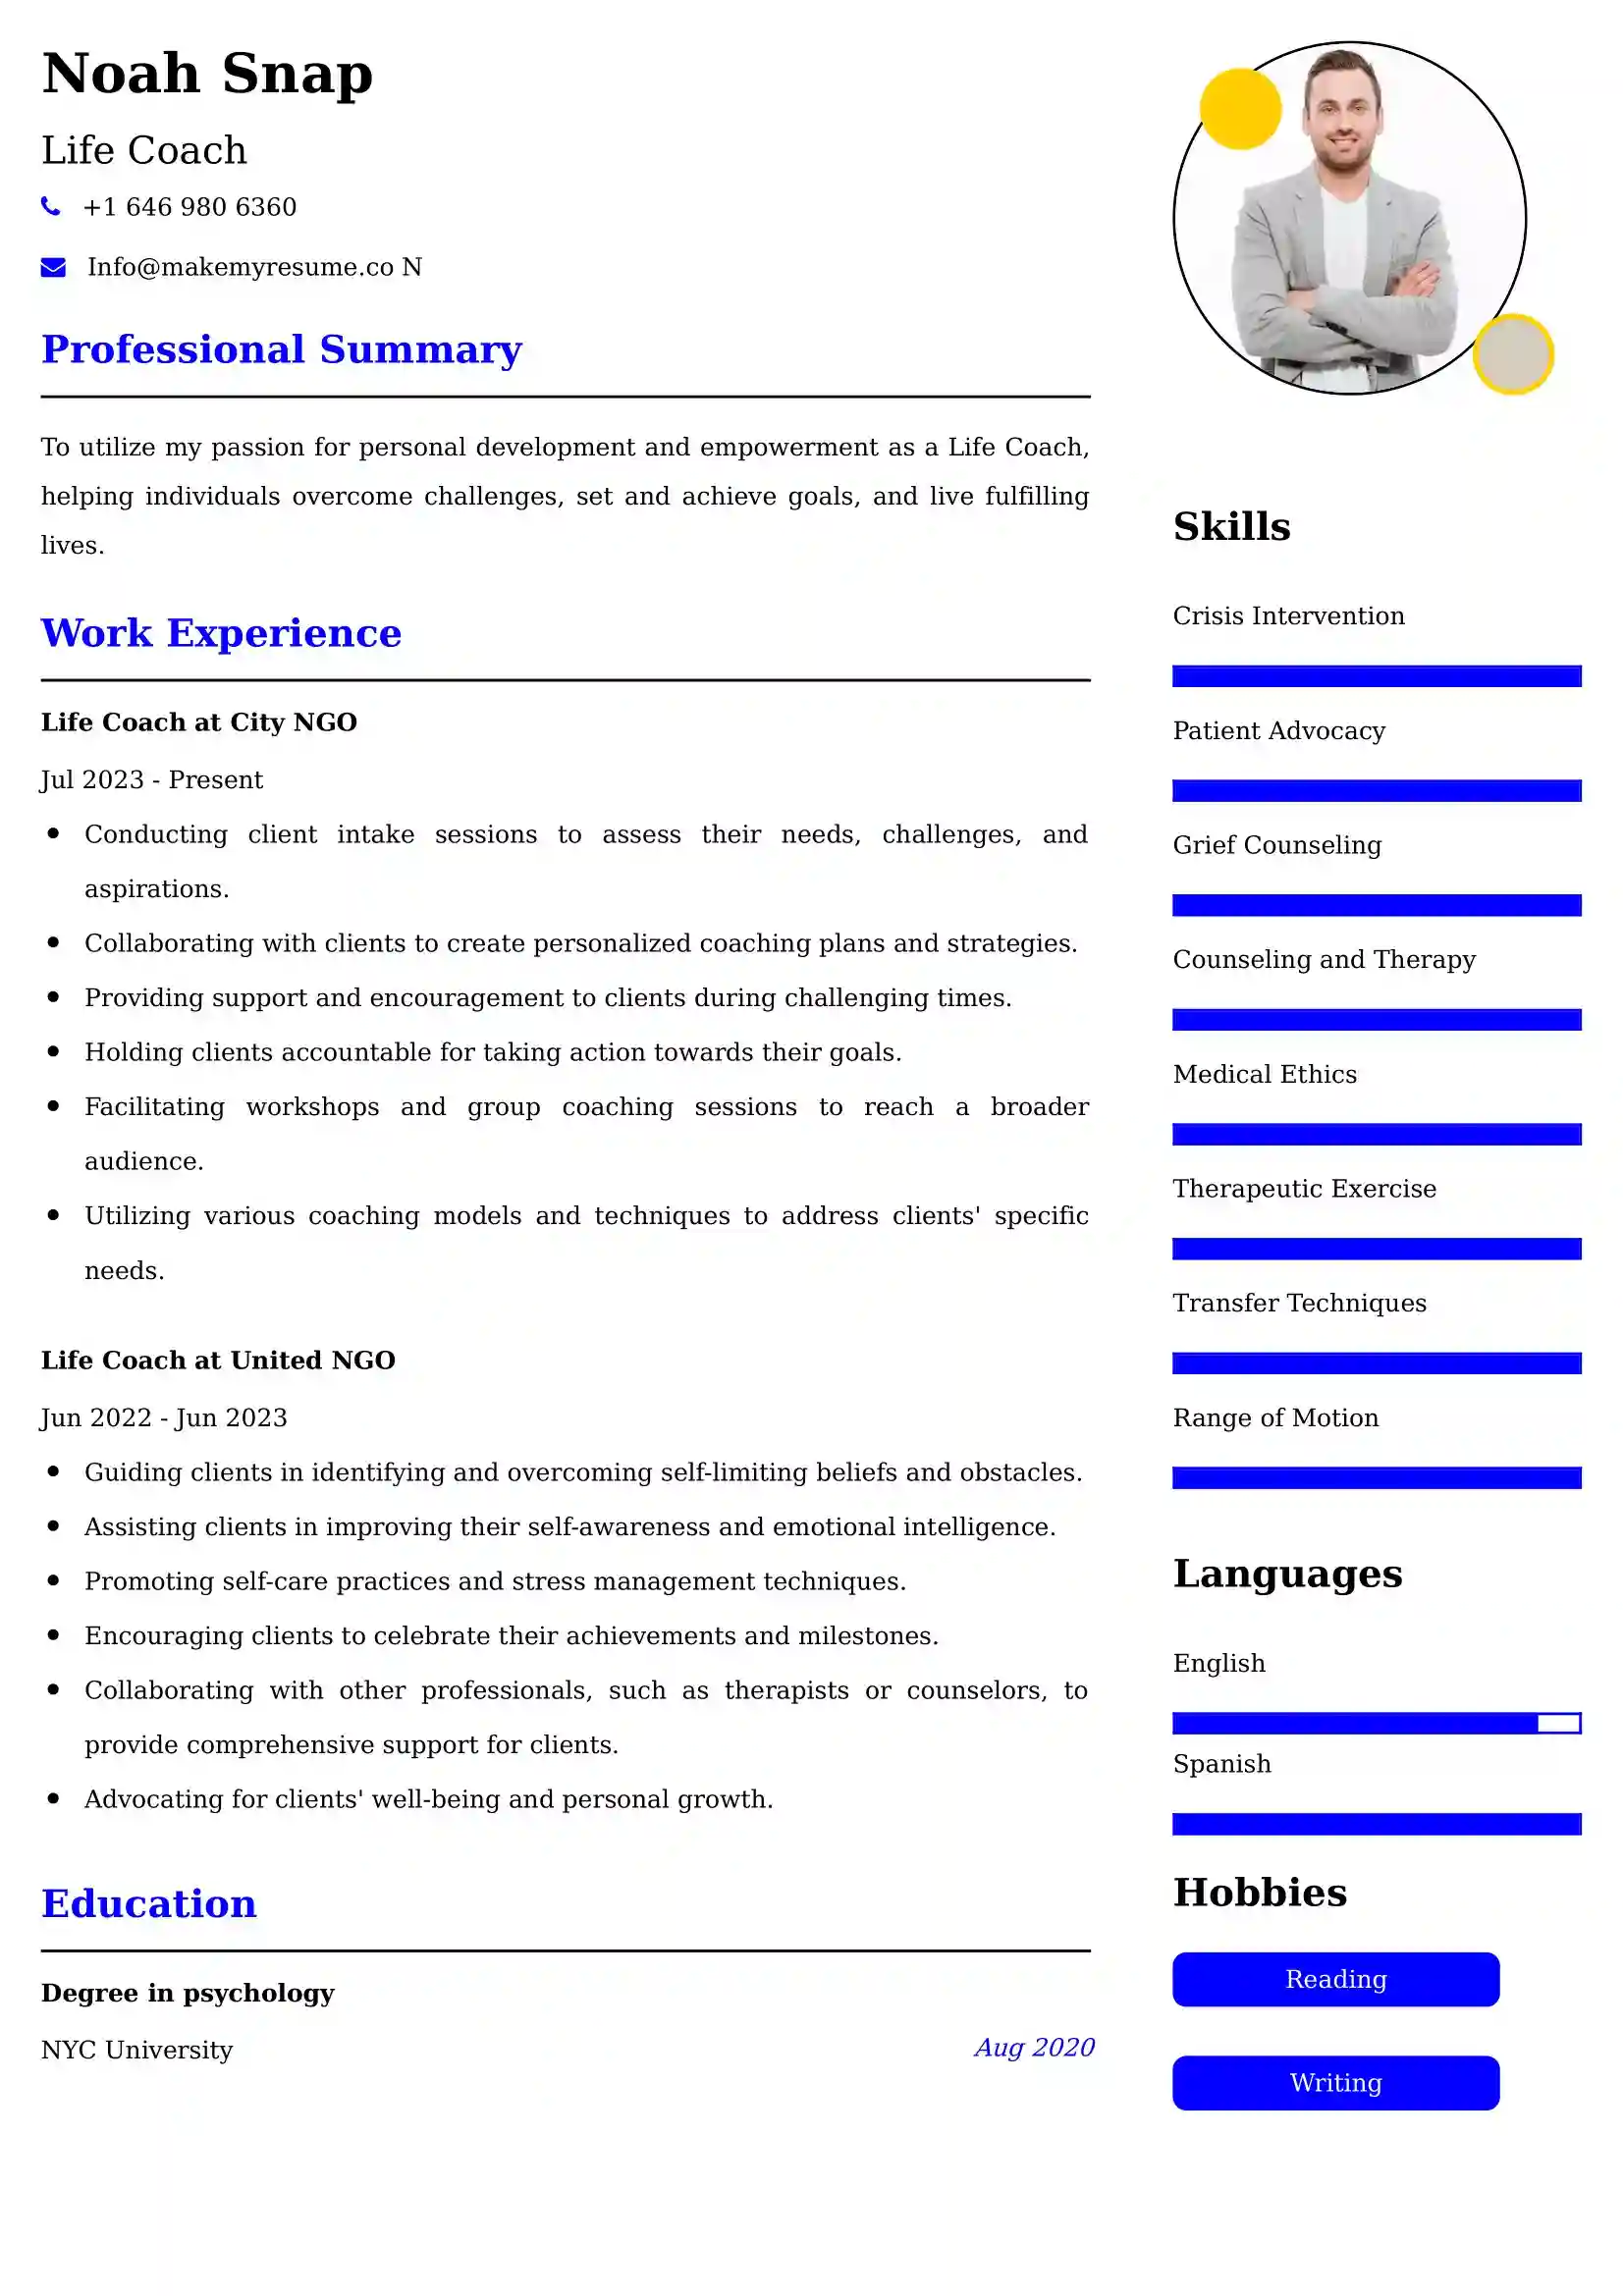 Life Coach Resume Examples - Brazilian Format, Latest Template